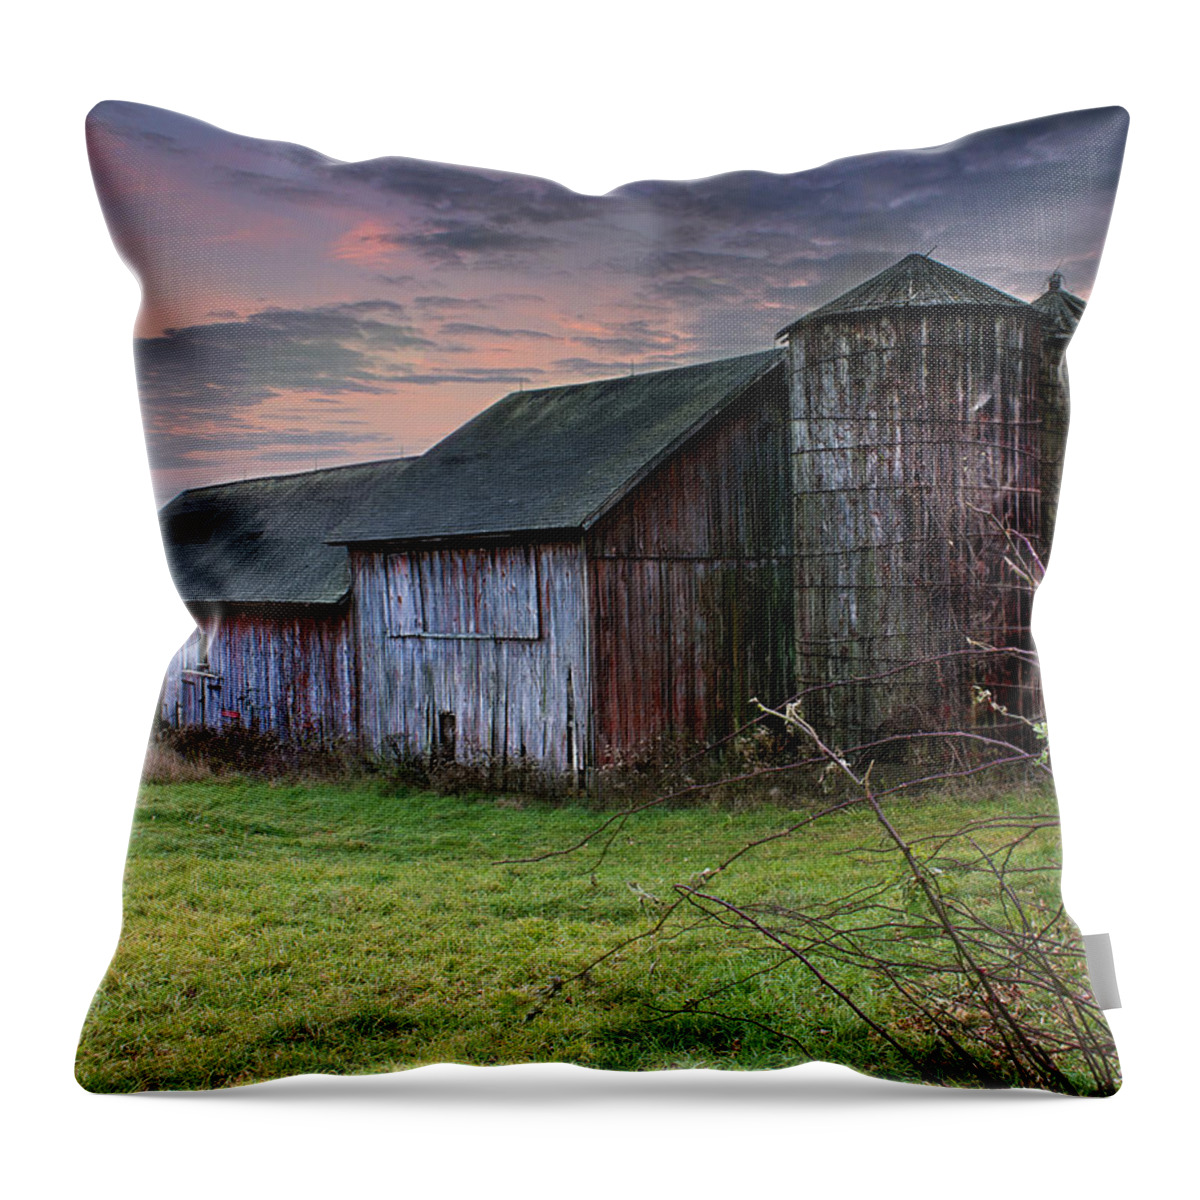 Red Barn Throw Pillow featuring the photograph Tobin's Barn by John Vose